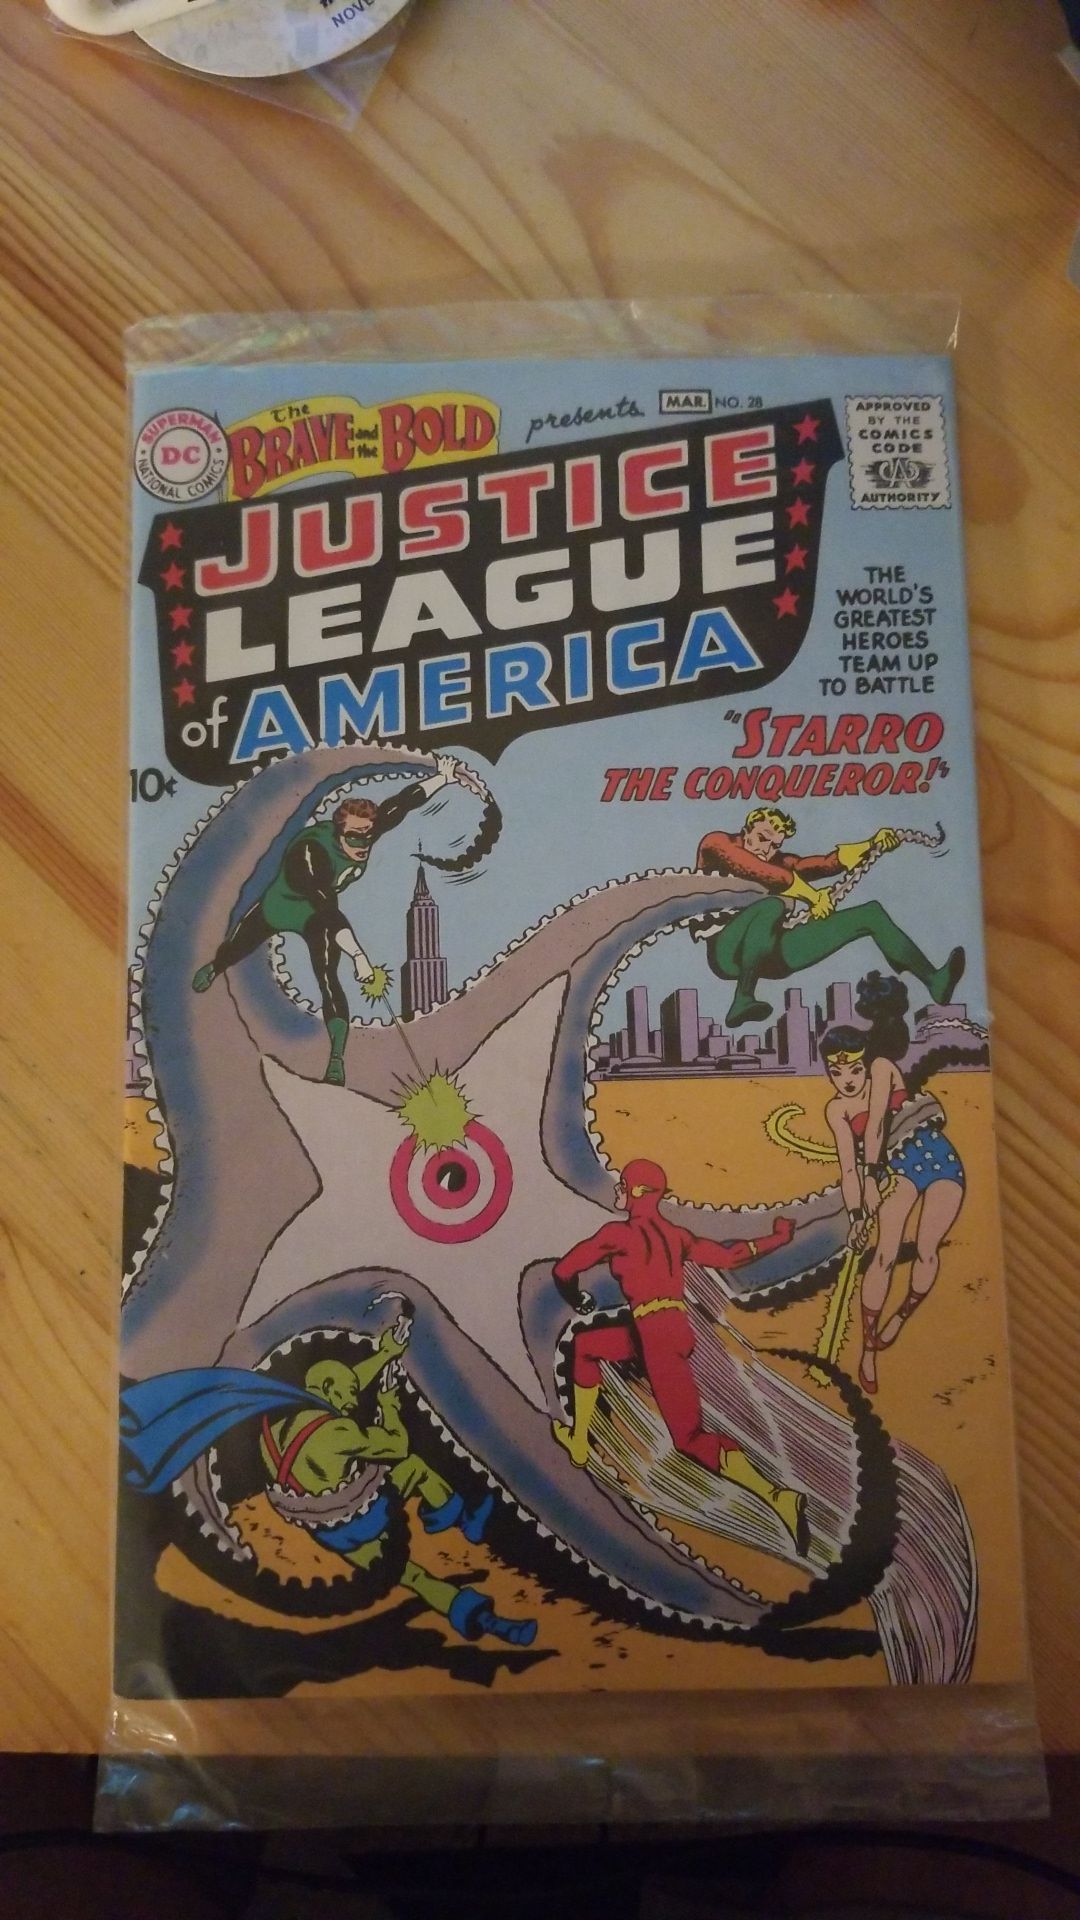 Justice League of America: The Brave and the Bold #28 for Sale in